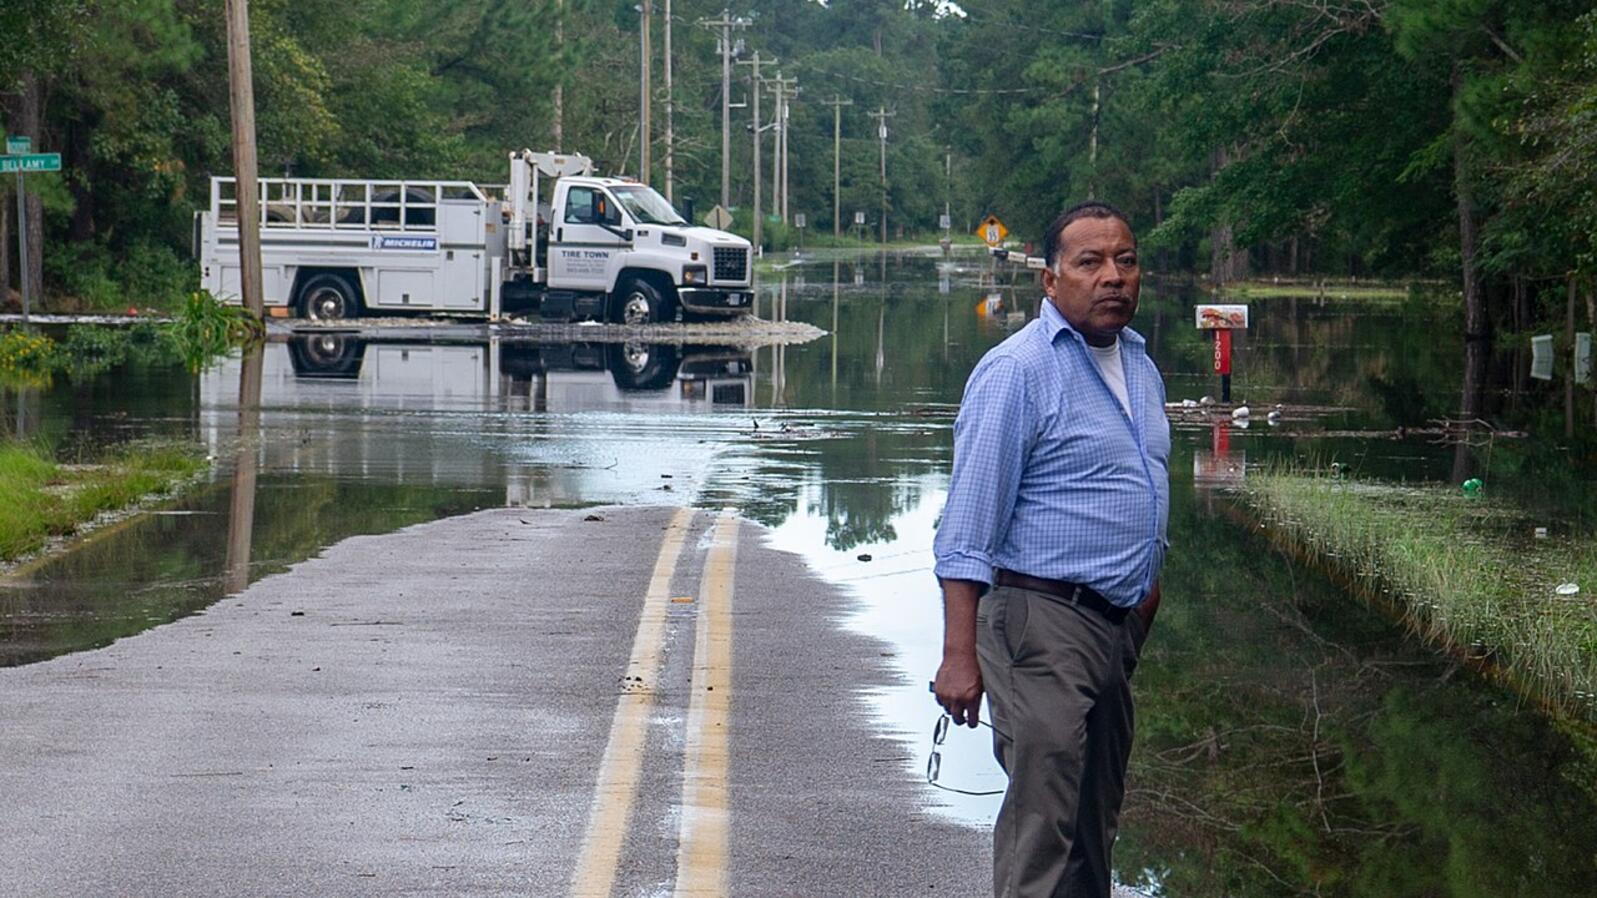 A man stands in front of a flooded road with emergency vehicles in the background